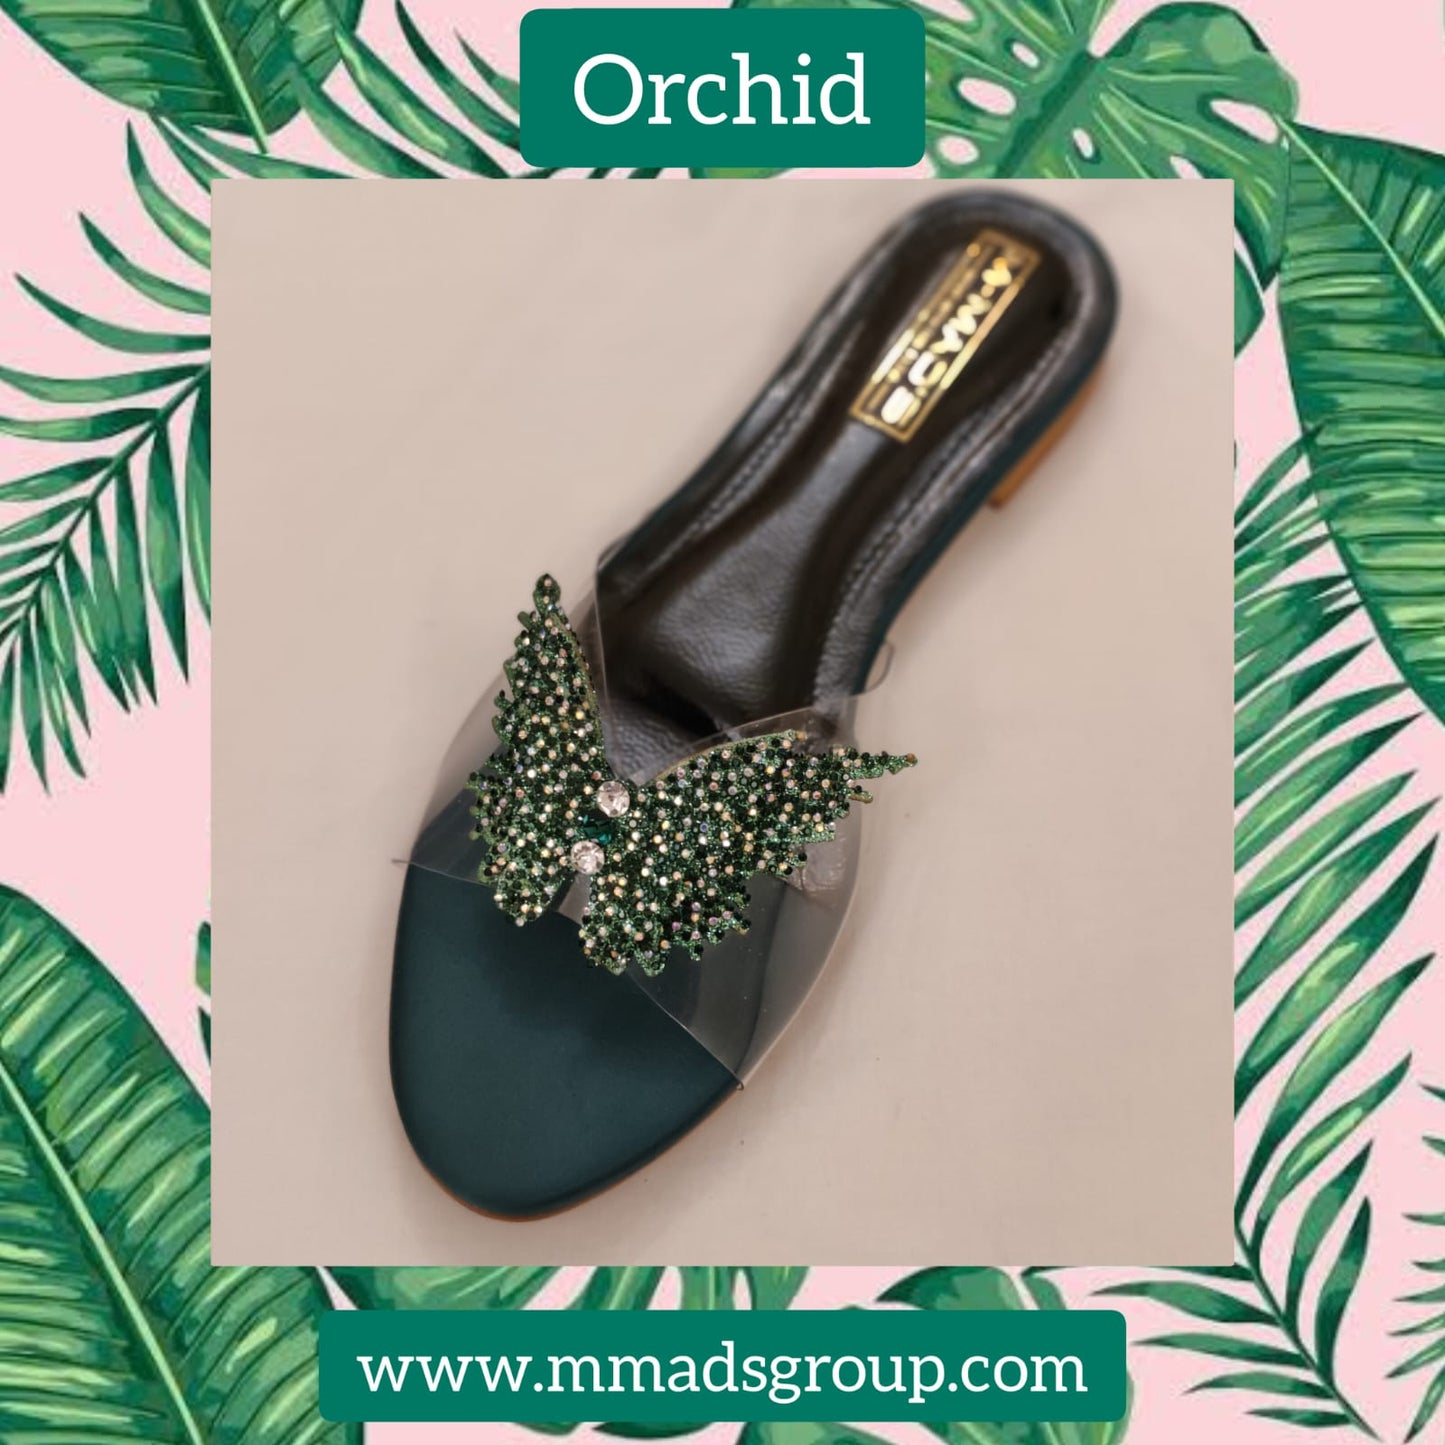 Orchid - Green